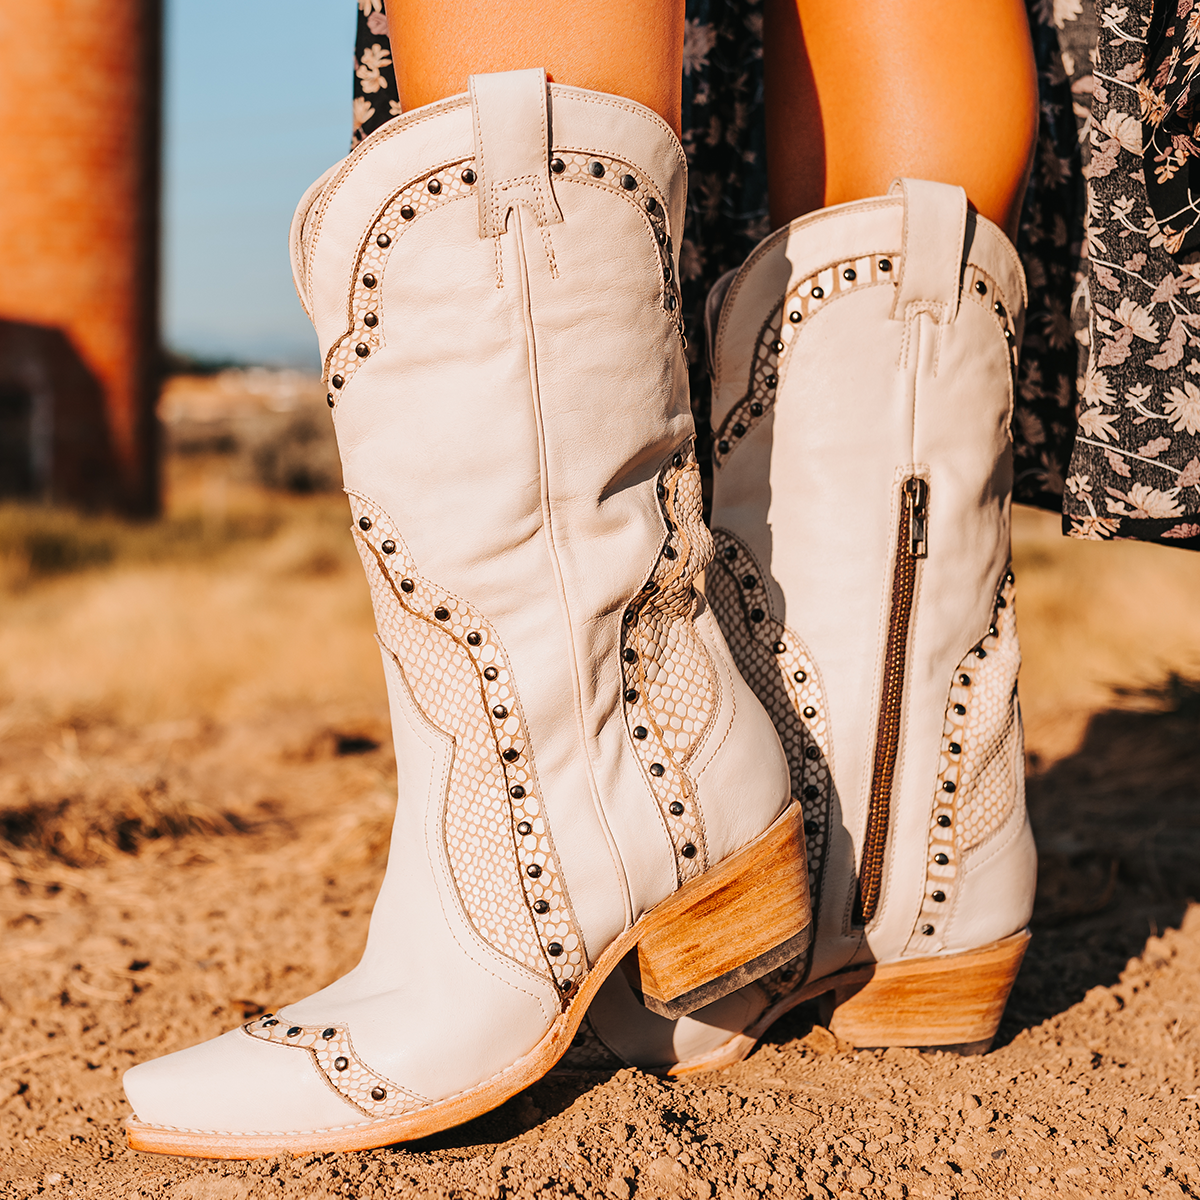 FREEBIRD women's Warner beige leather western cowboy boot with embossed detailing and snip toe construction